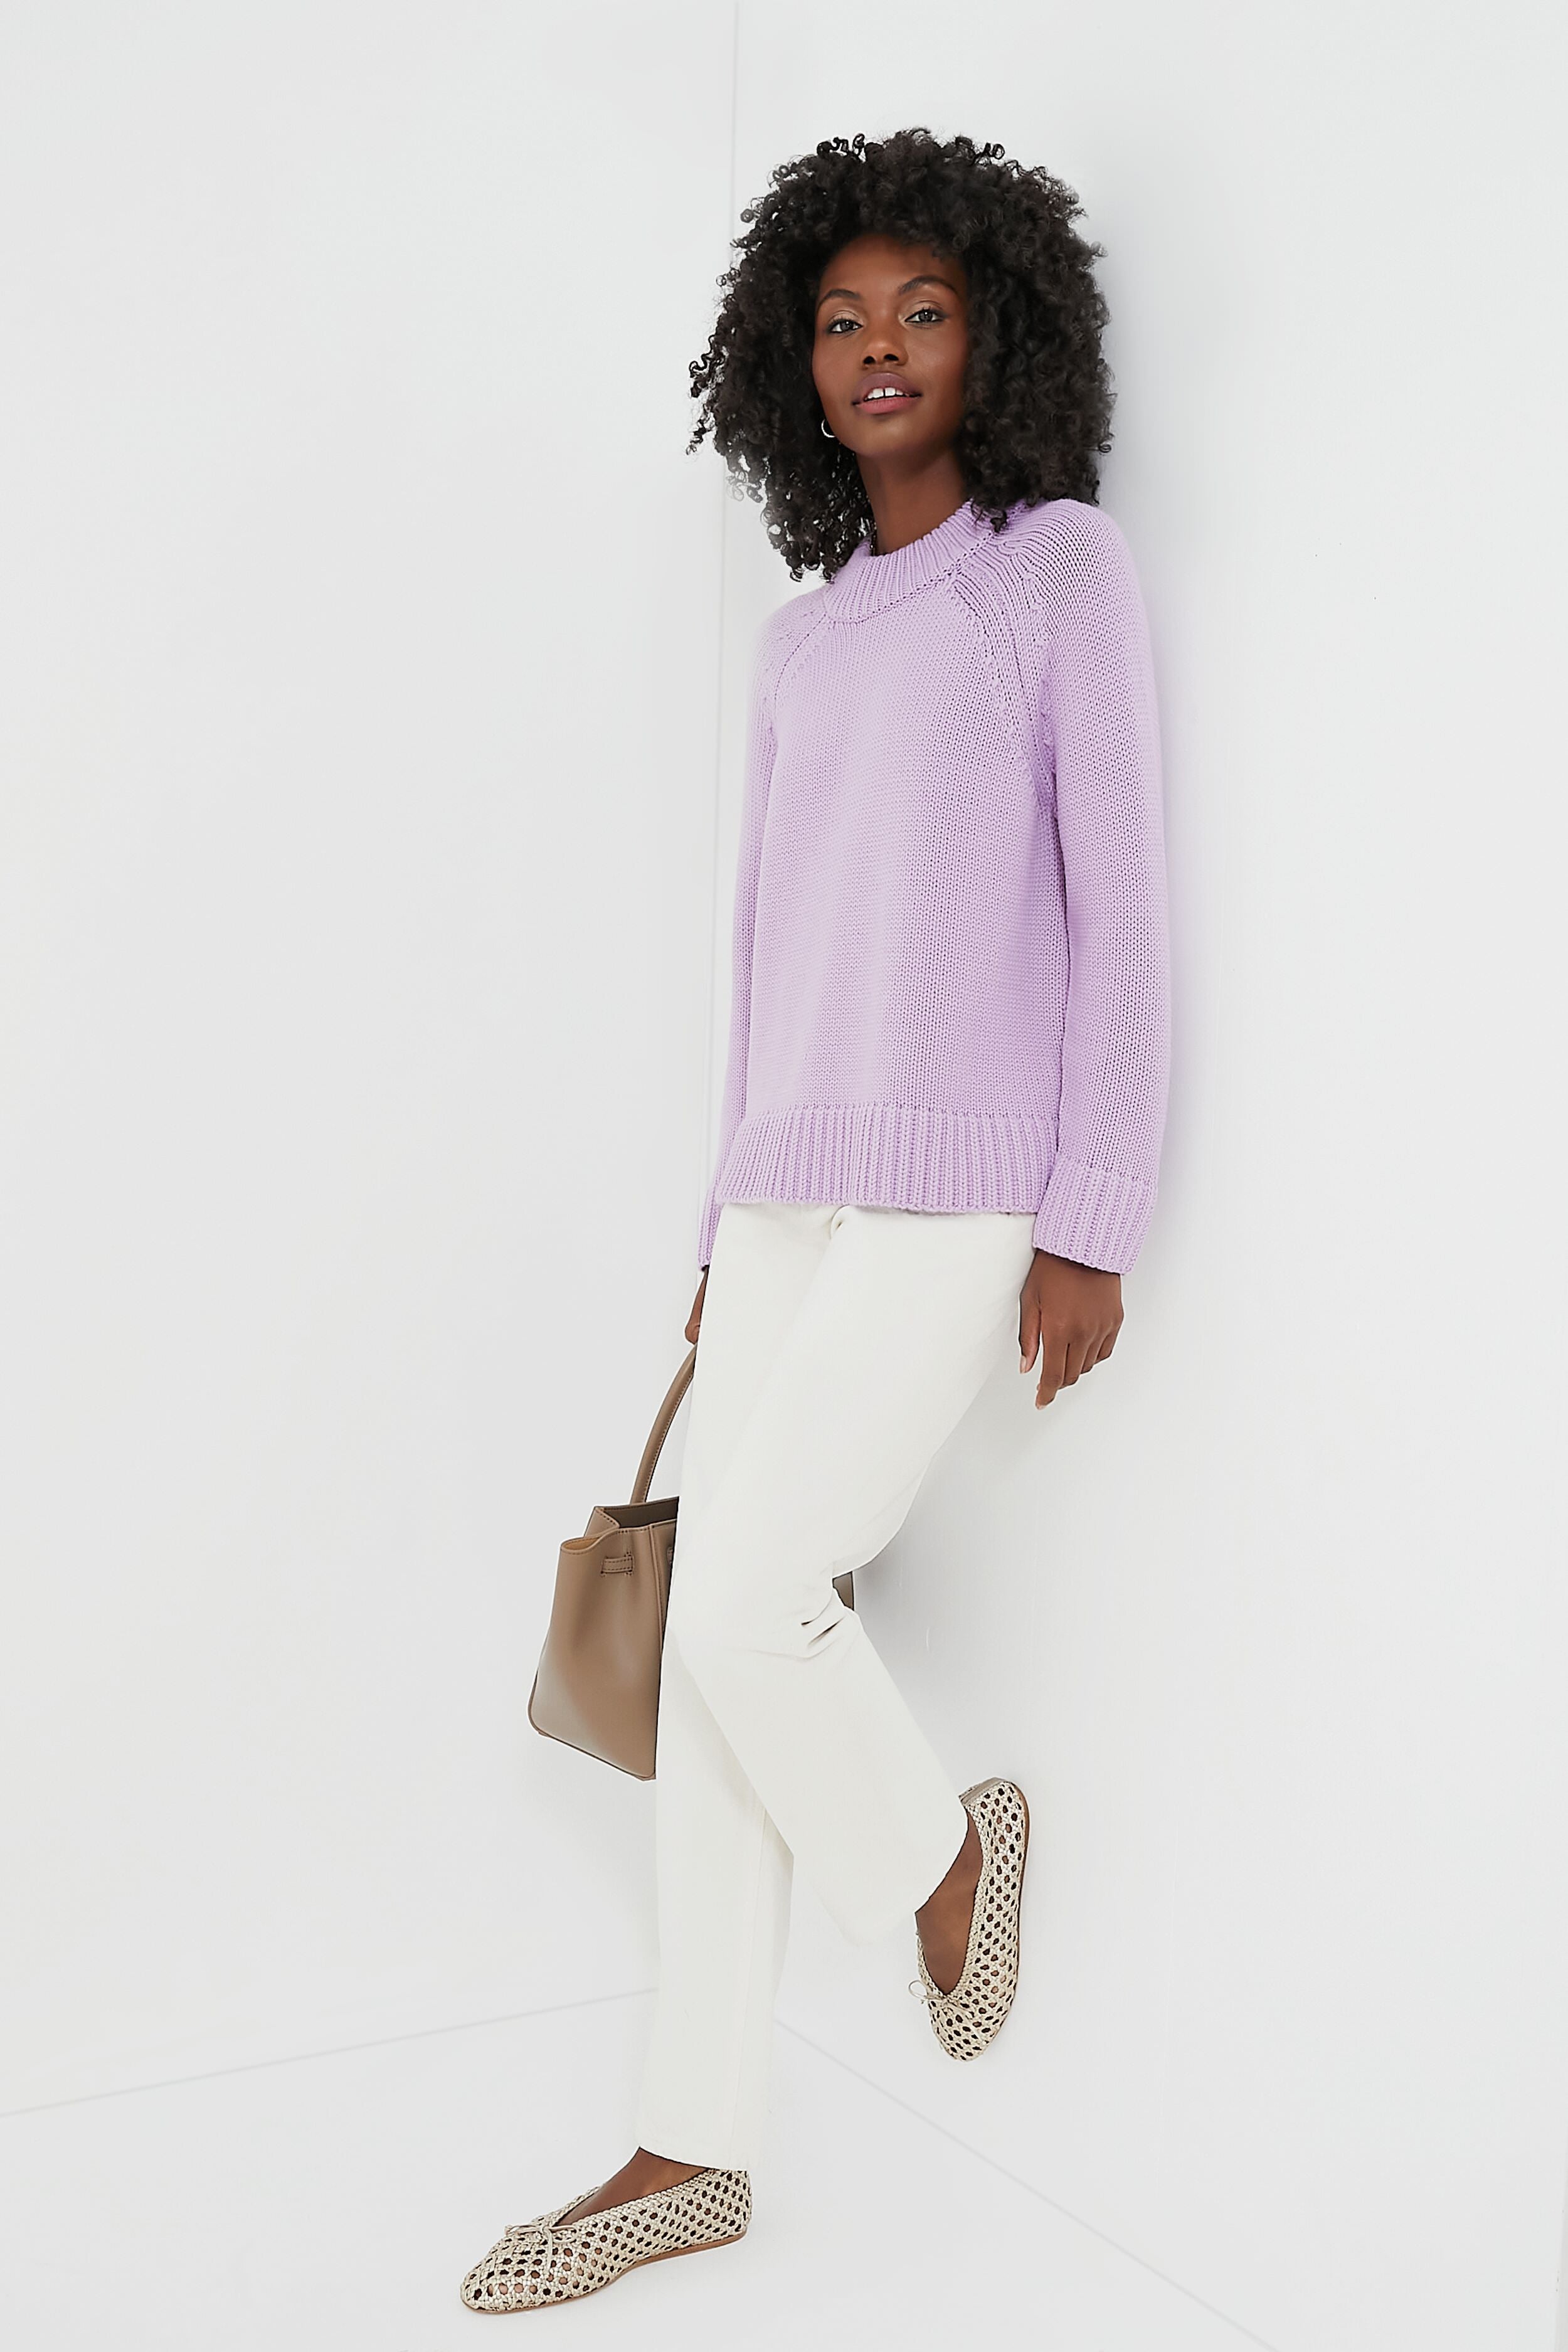 CANDRA BASIC CREW NECK TOP (LILAC)